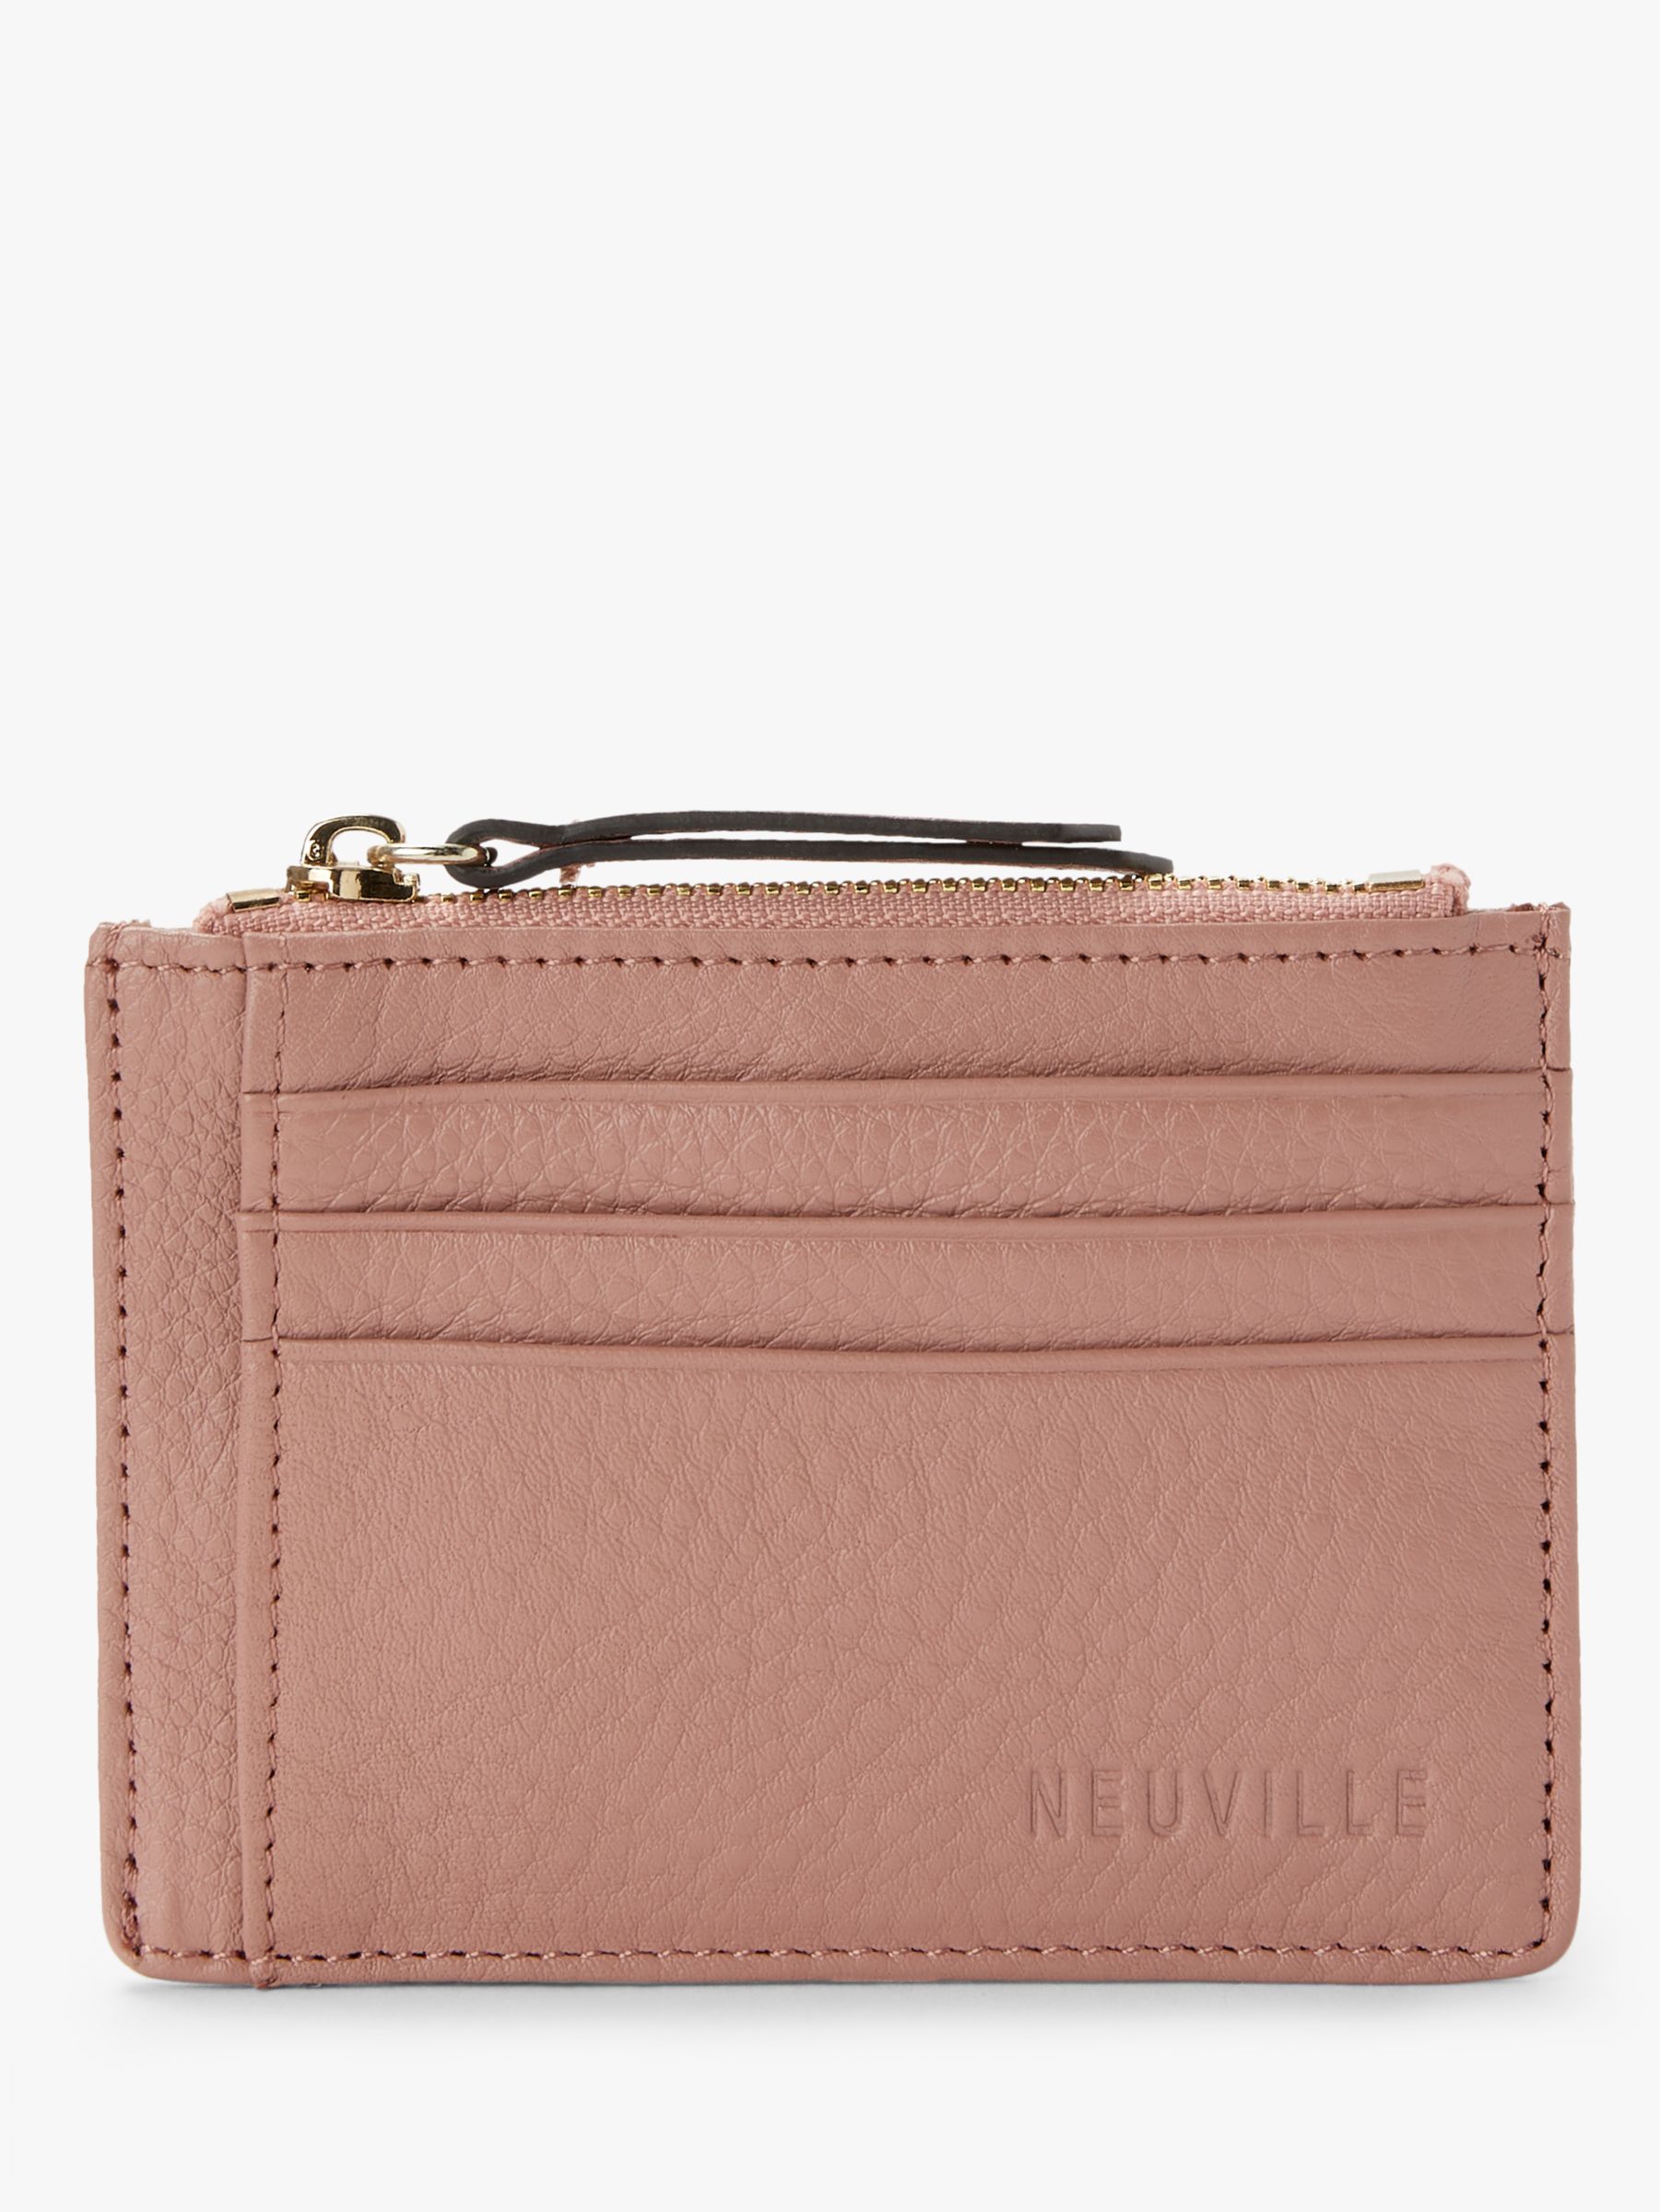 Neuville Leather Zipped Card Holder